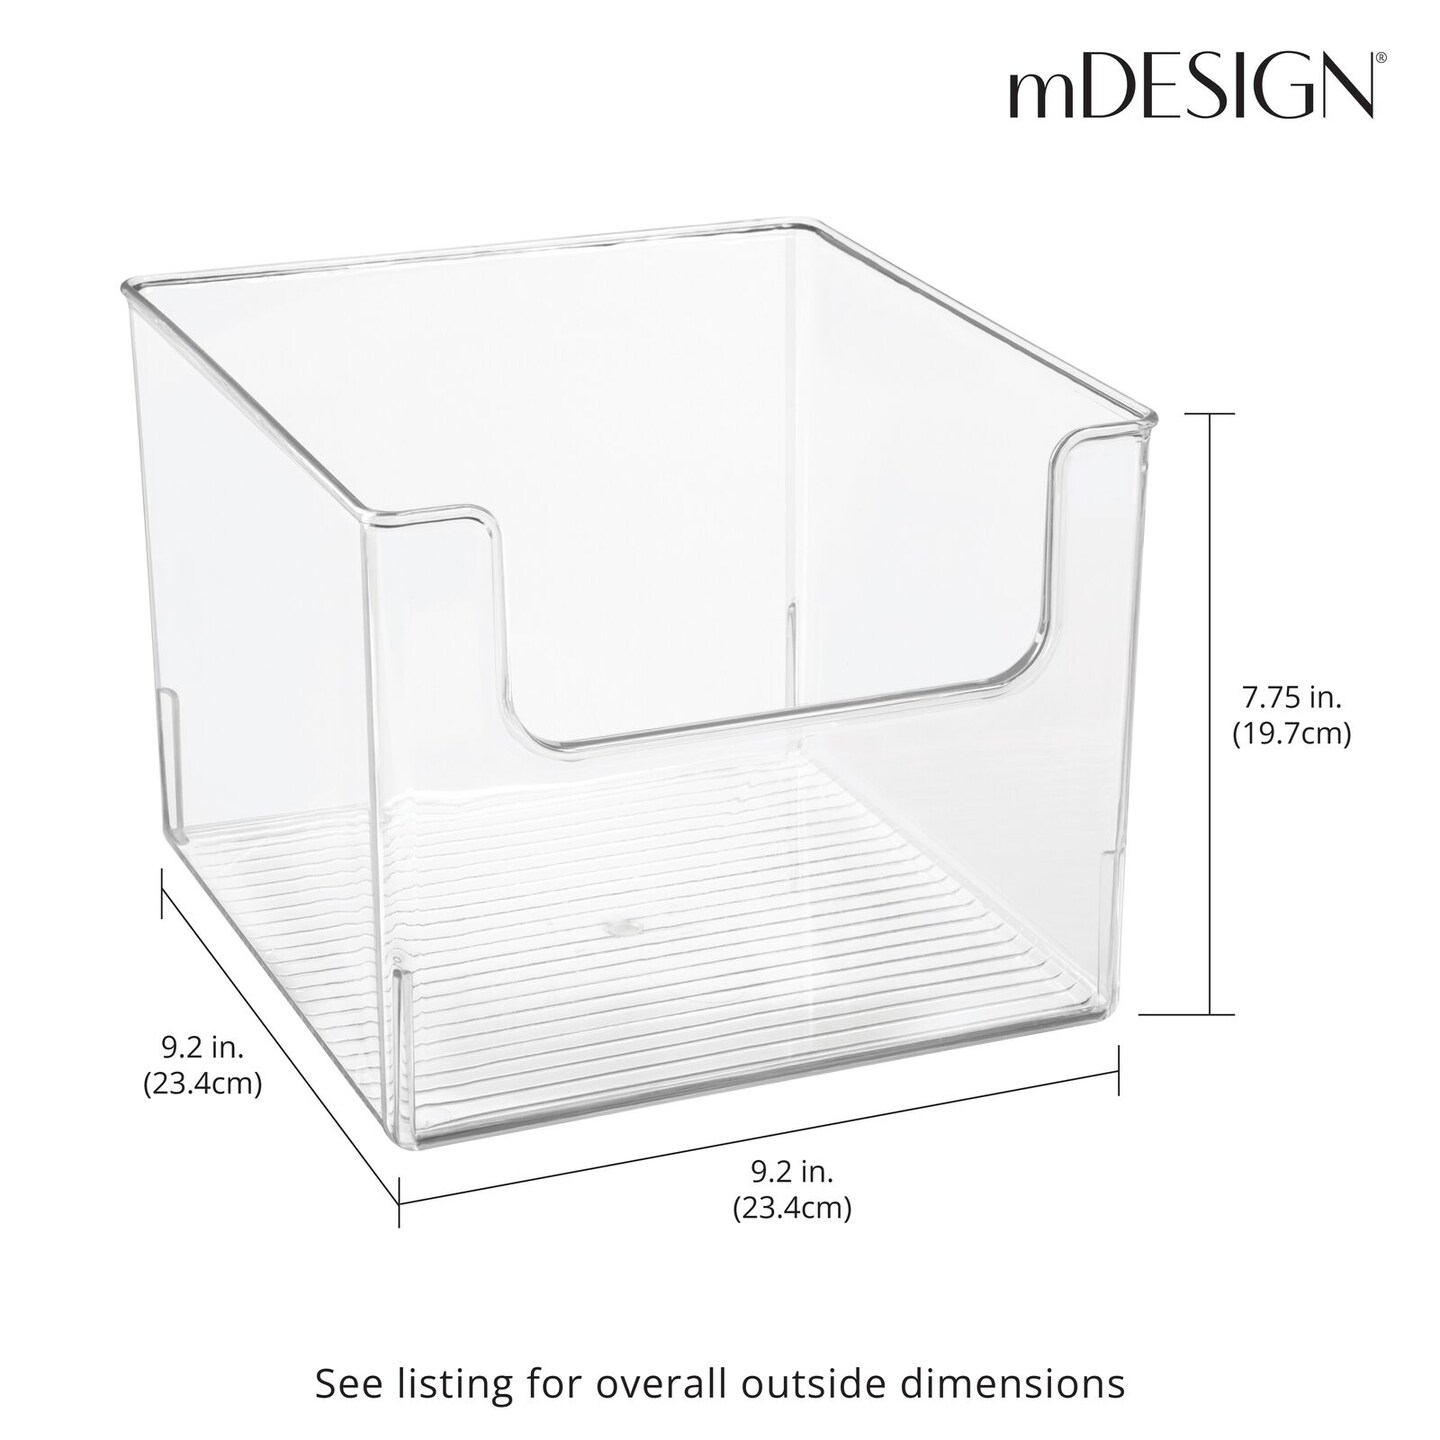 mDesign Open Front Plastic Storage Bin for Cube Furniture, 12 W, 4 Pack -  Clear